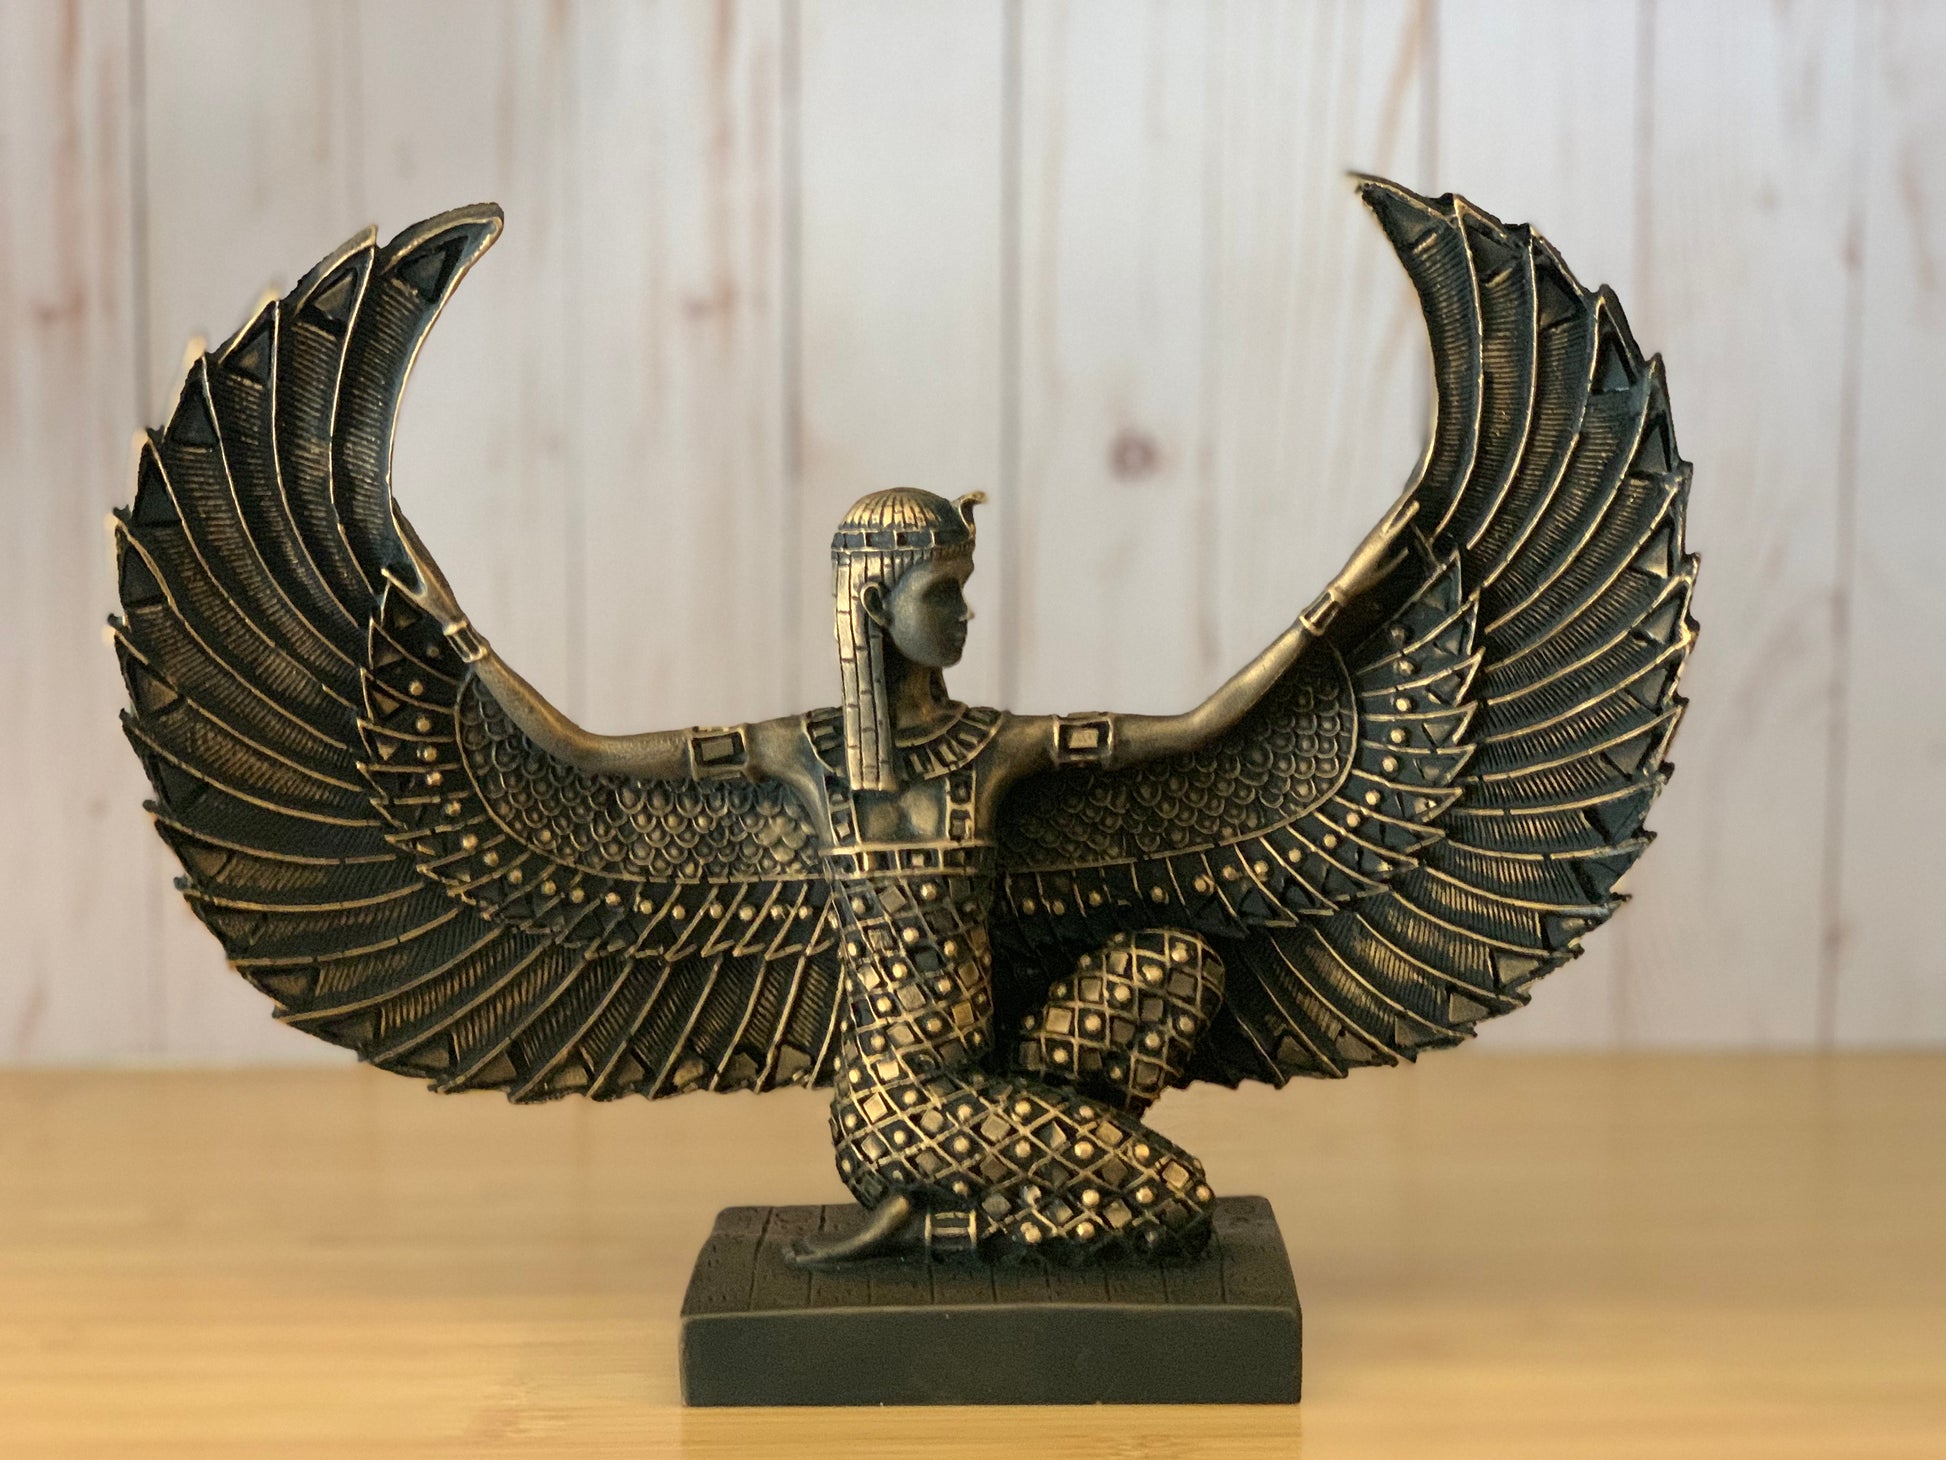 Artistically crafted Egyptian Goddess Isis statue with open wings, adorned in gold leaf, symbolizing ancient Egyptian mystique and maternal power